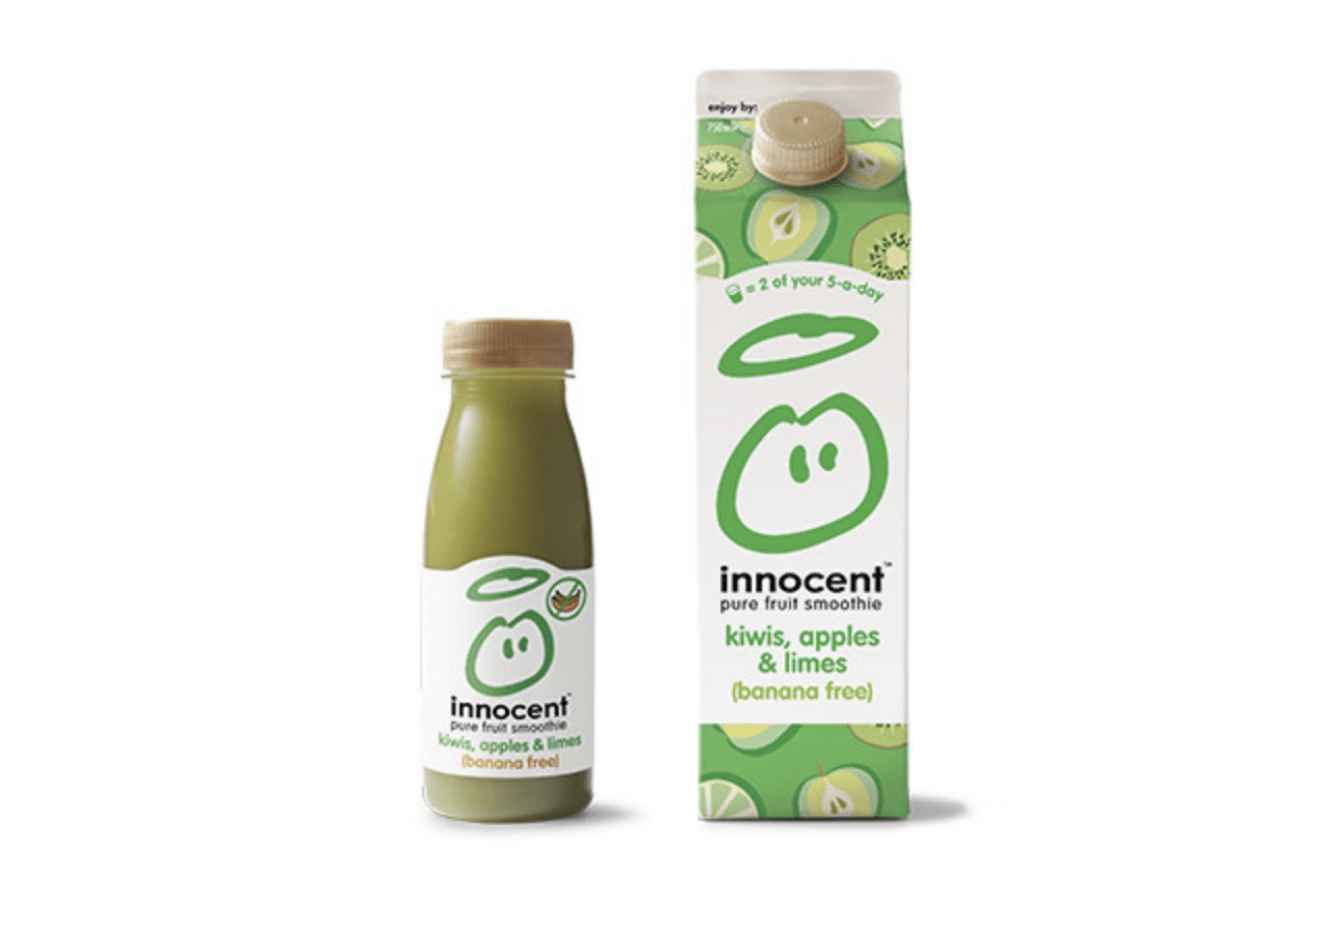 Packaging marque innocent